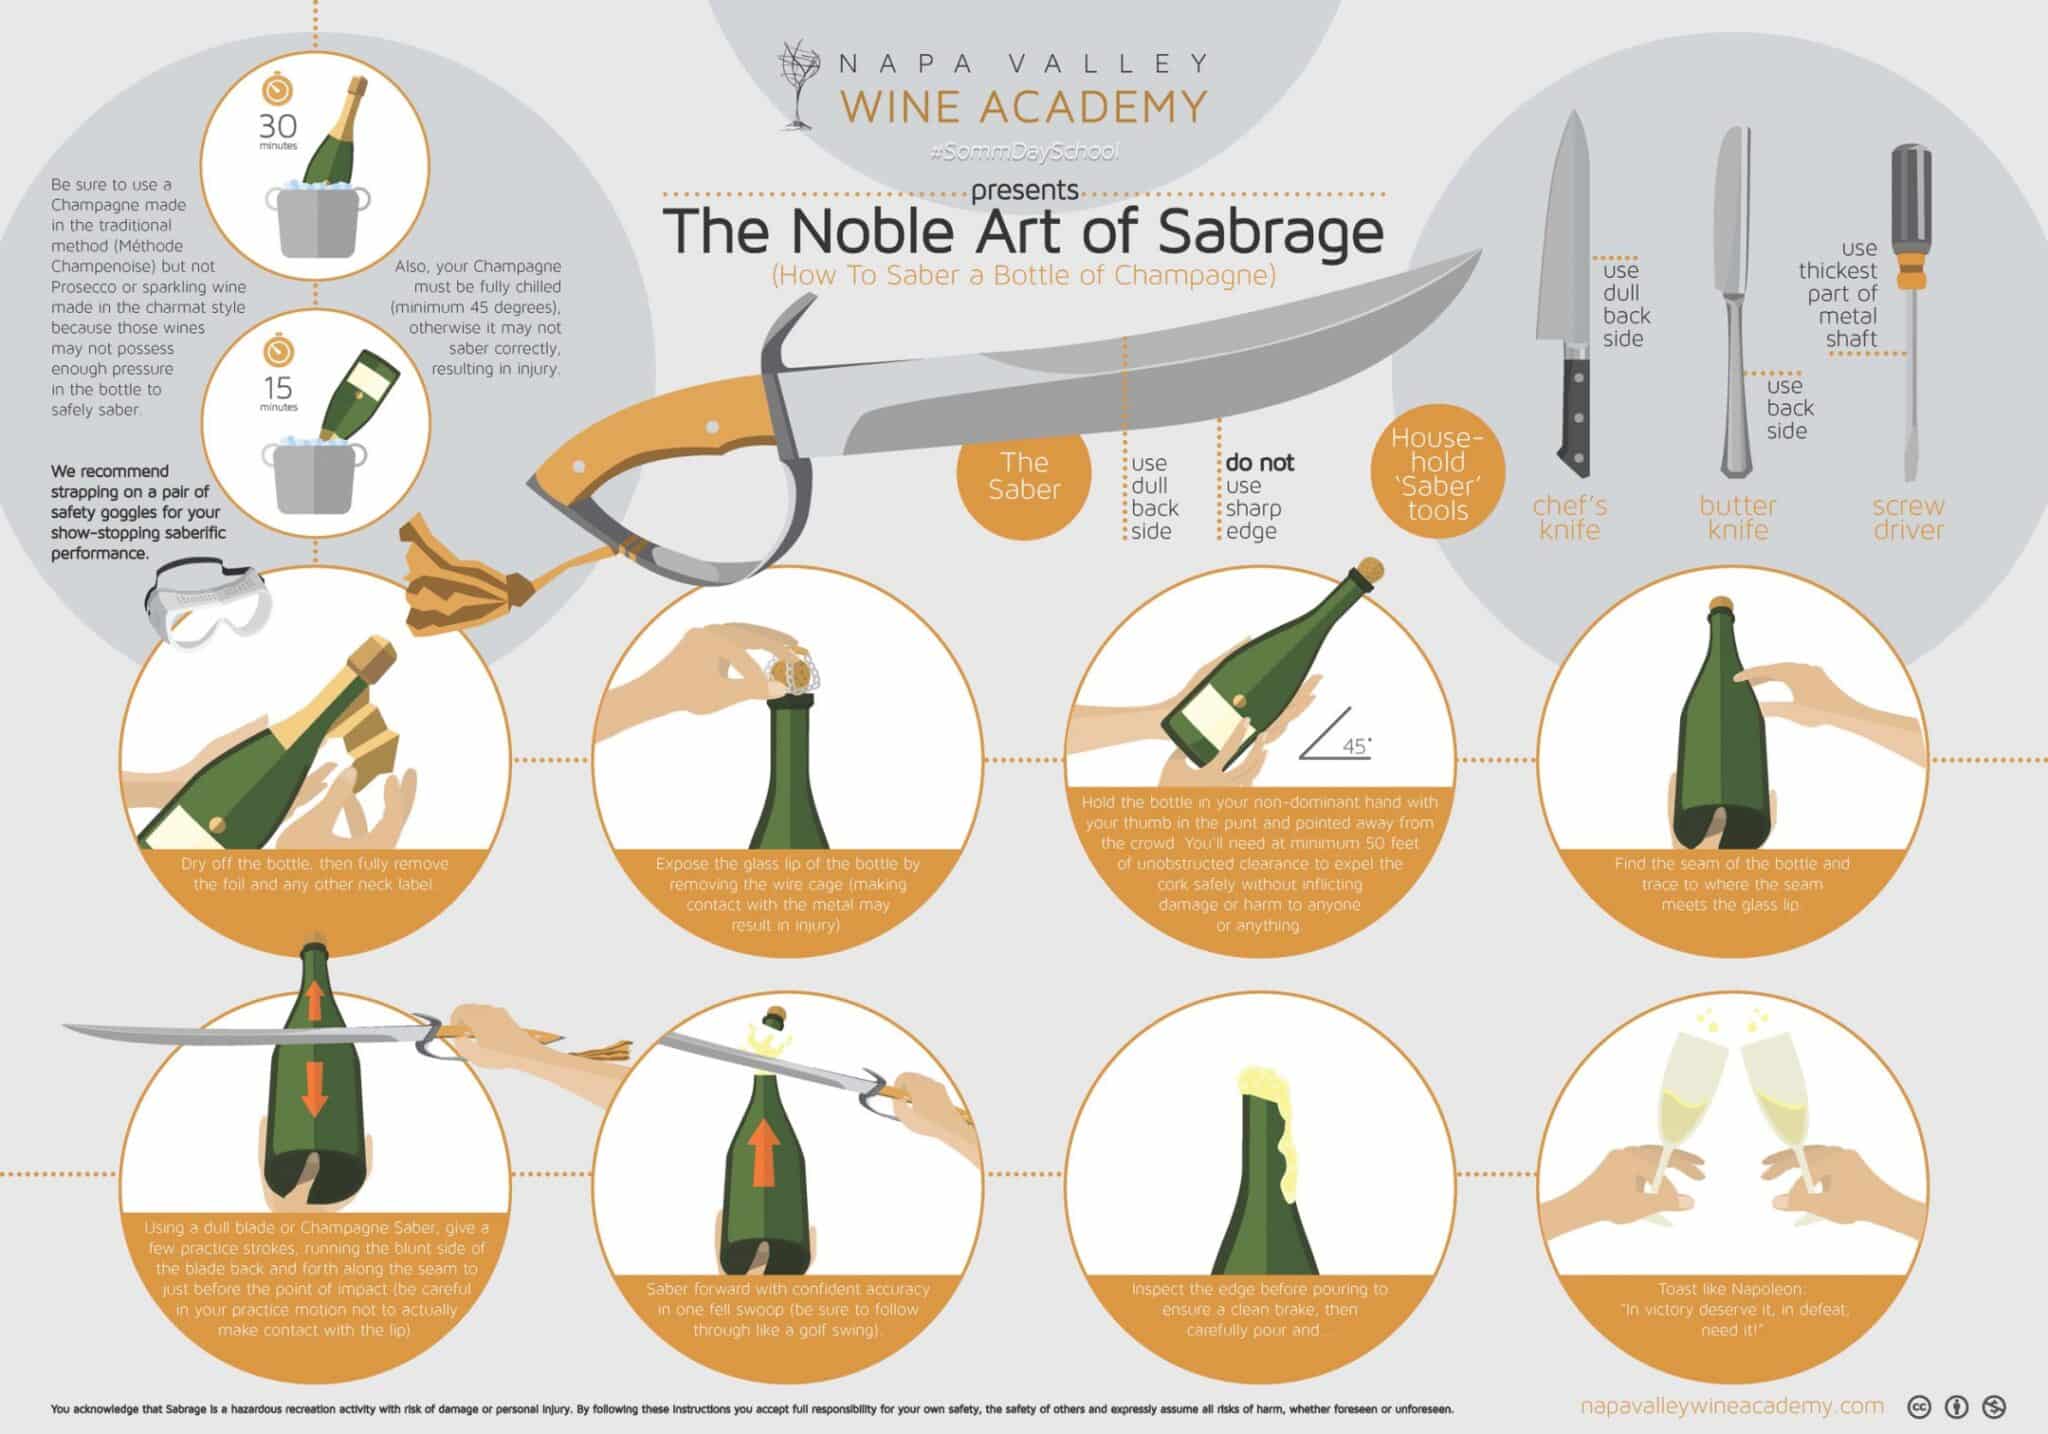 How To Saber a Bottle of Champagne